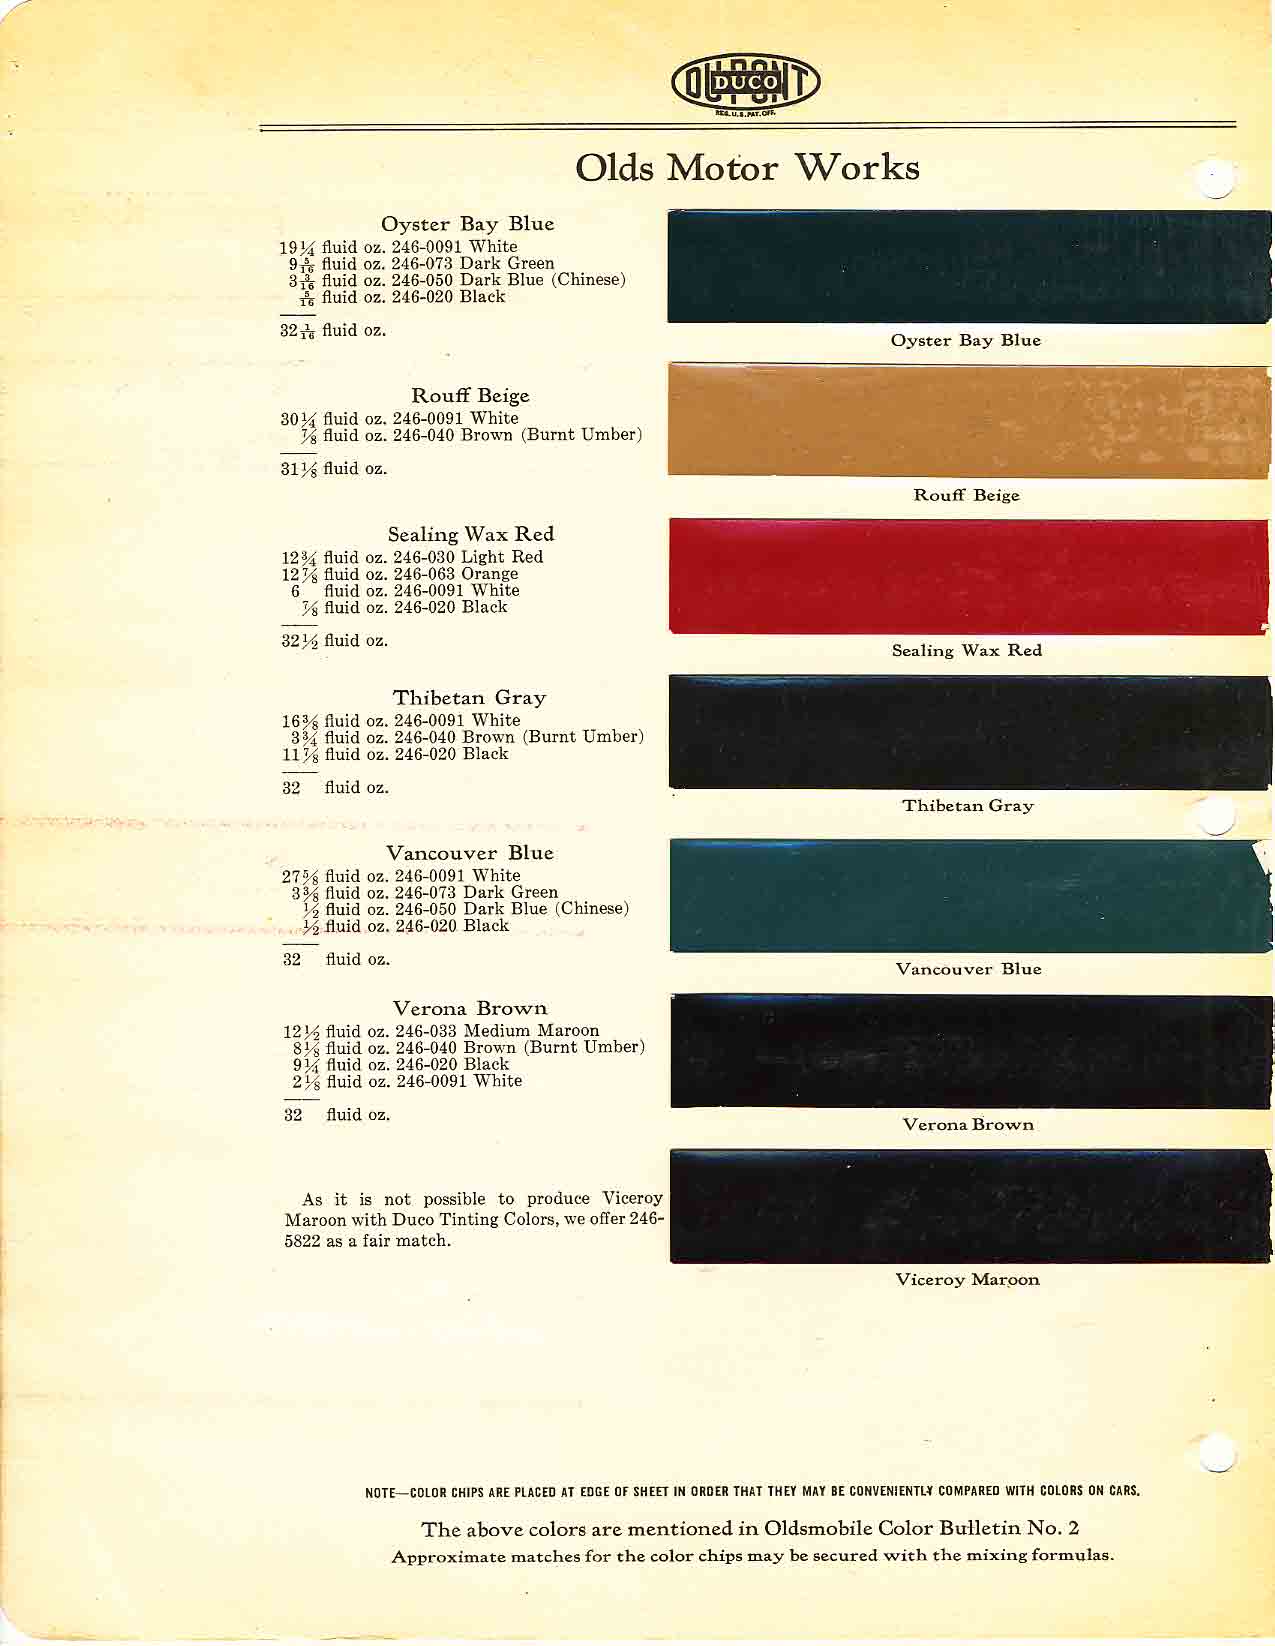 Oldsmobile Paint and Color Code Chart